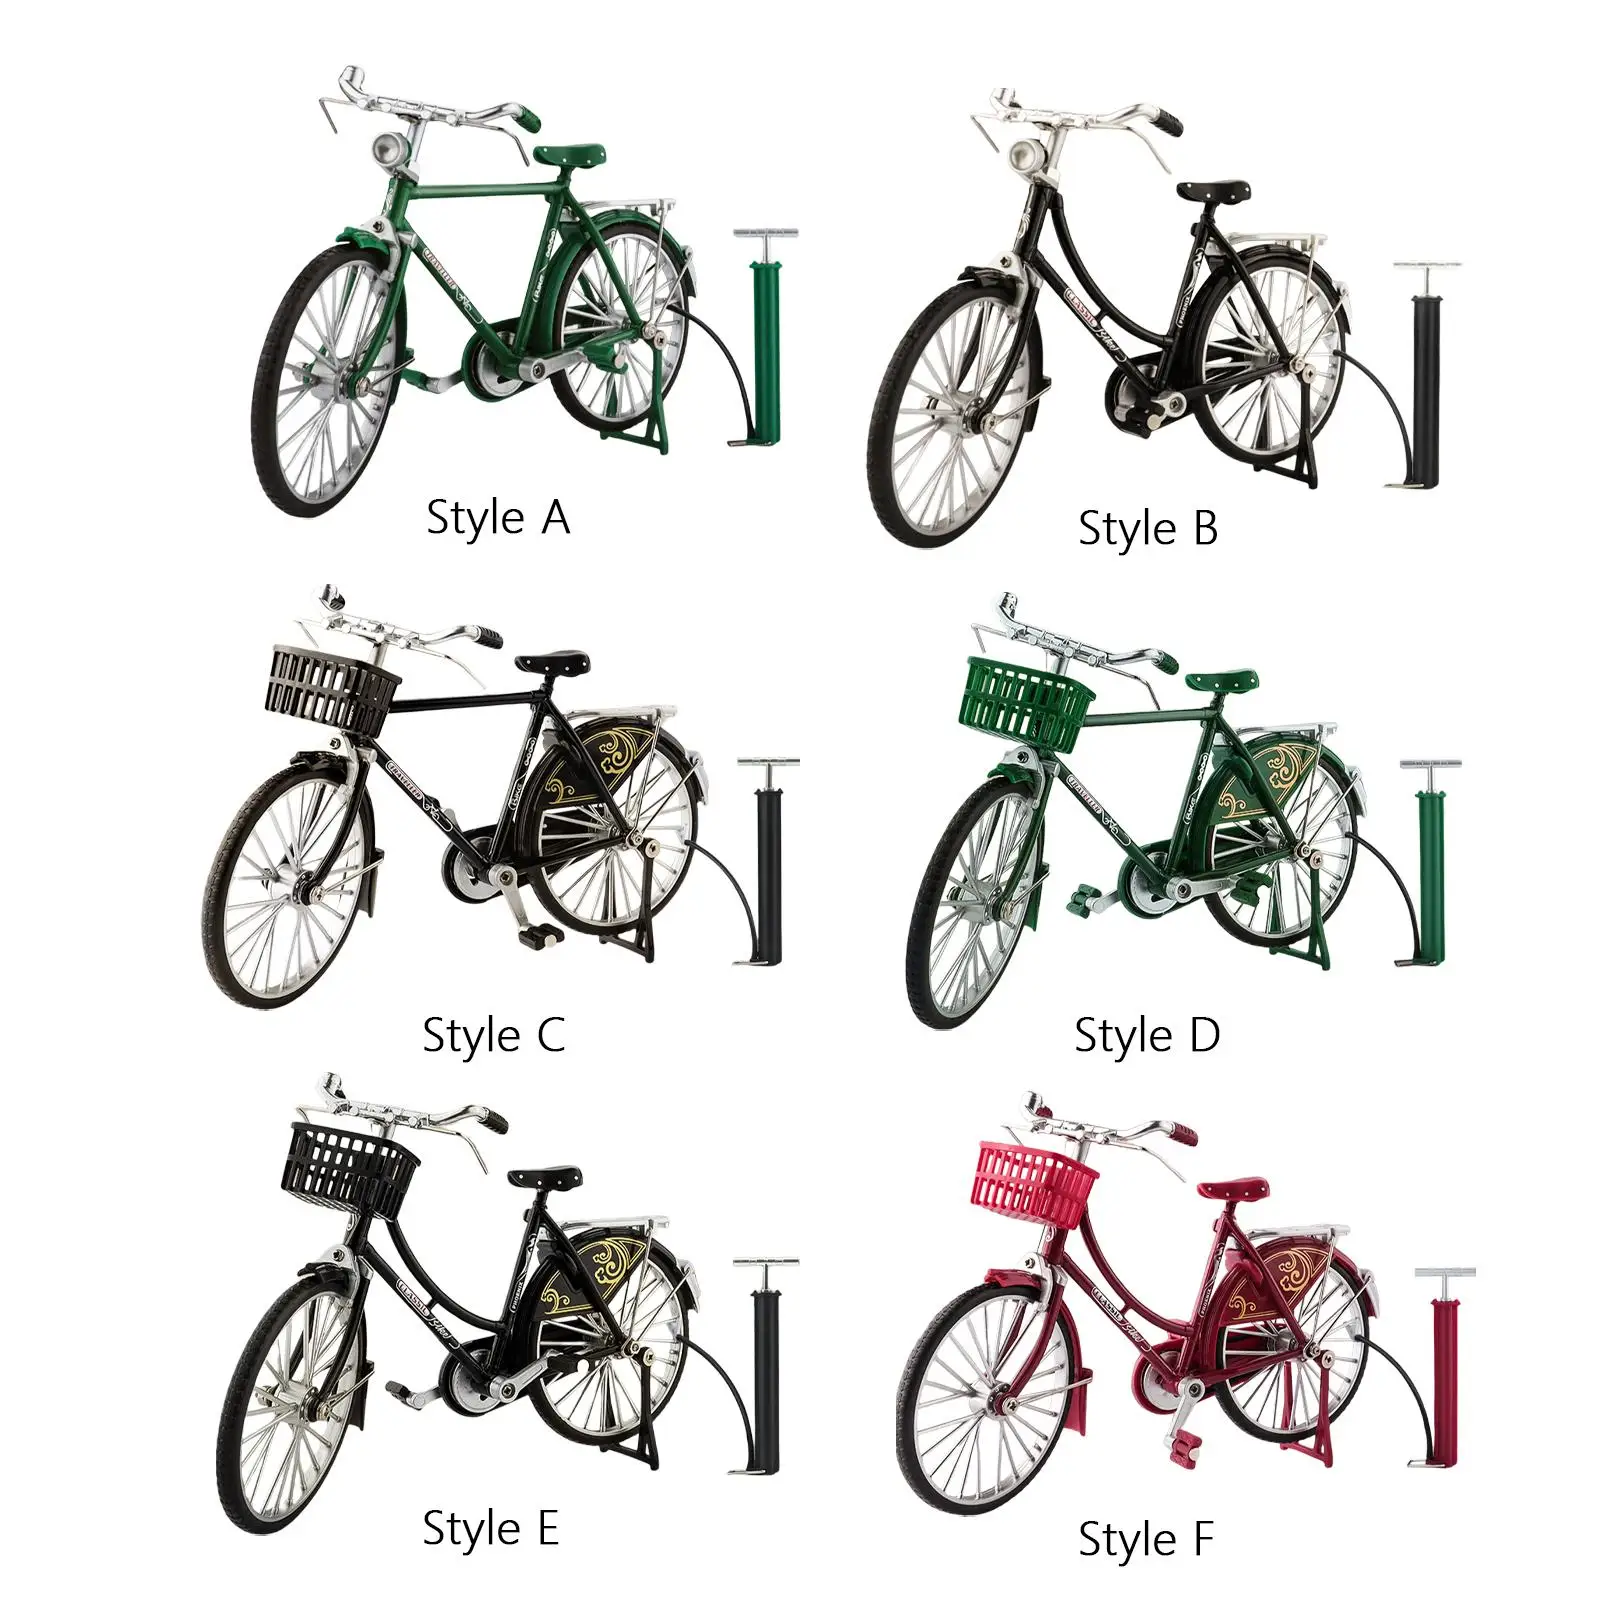 1:10 Simulation Bike Model Vehicle Art Craft Collectible Figurines Finger Bicycle for Dollhouse Office Bedroom Decoration Girls